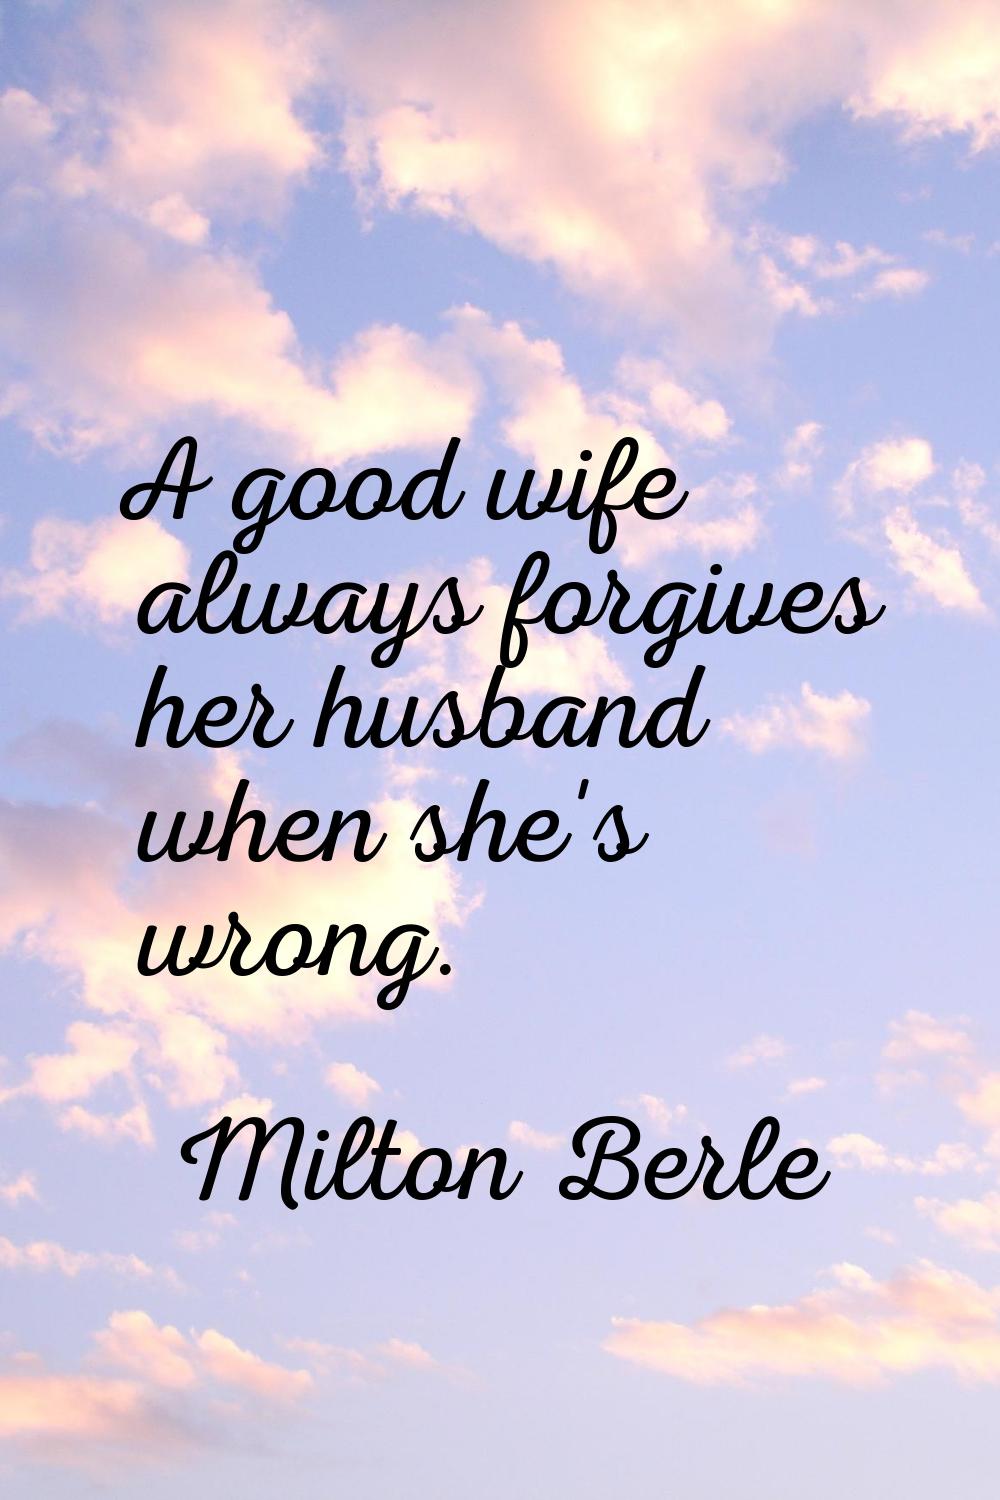 A good wife always forgives her husband when she's wrong.